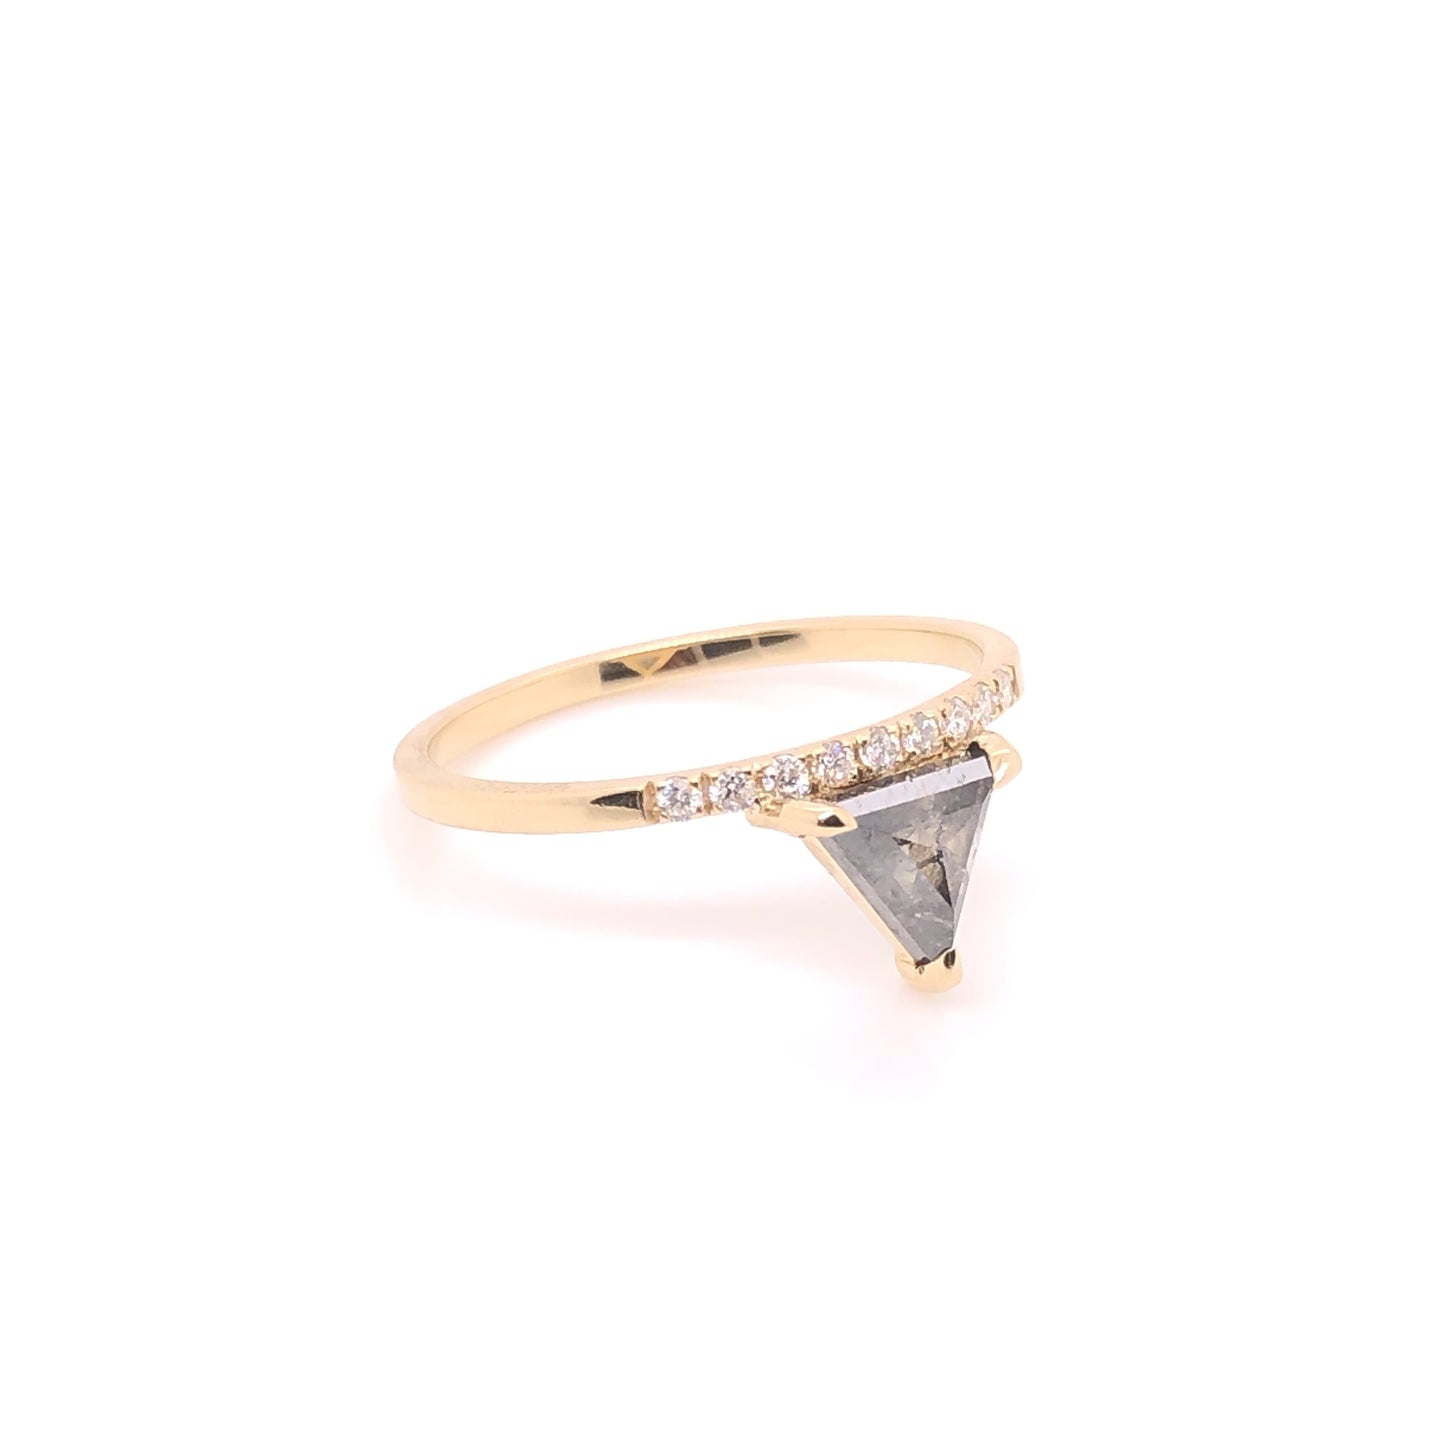 IMMEDIATE DELIVERY / Salt &amp; Pepper Diamond Ring Triangular cut with diamonds / 14k yellow gold / Size 7.25